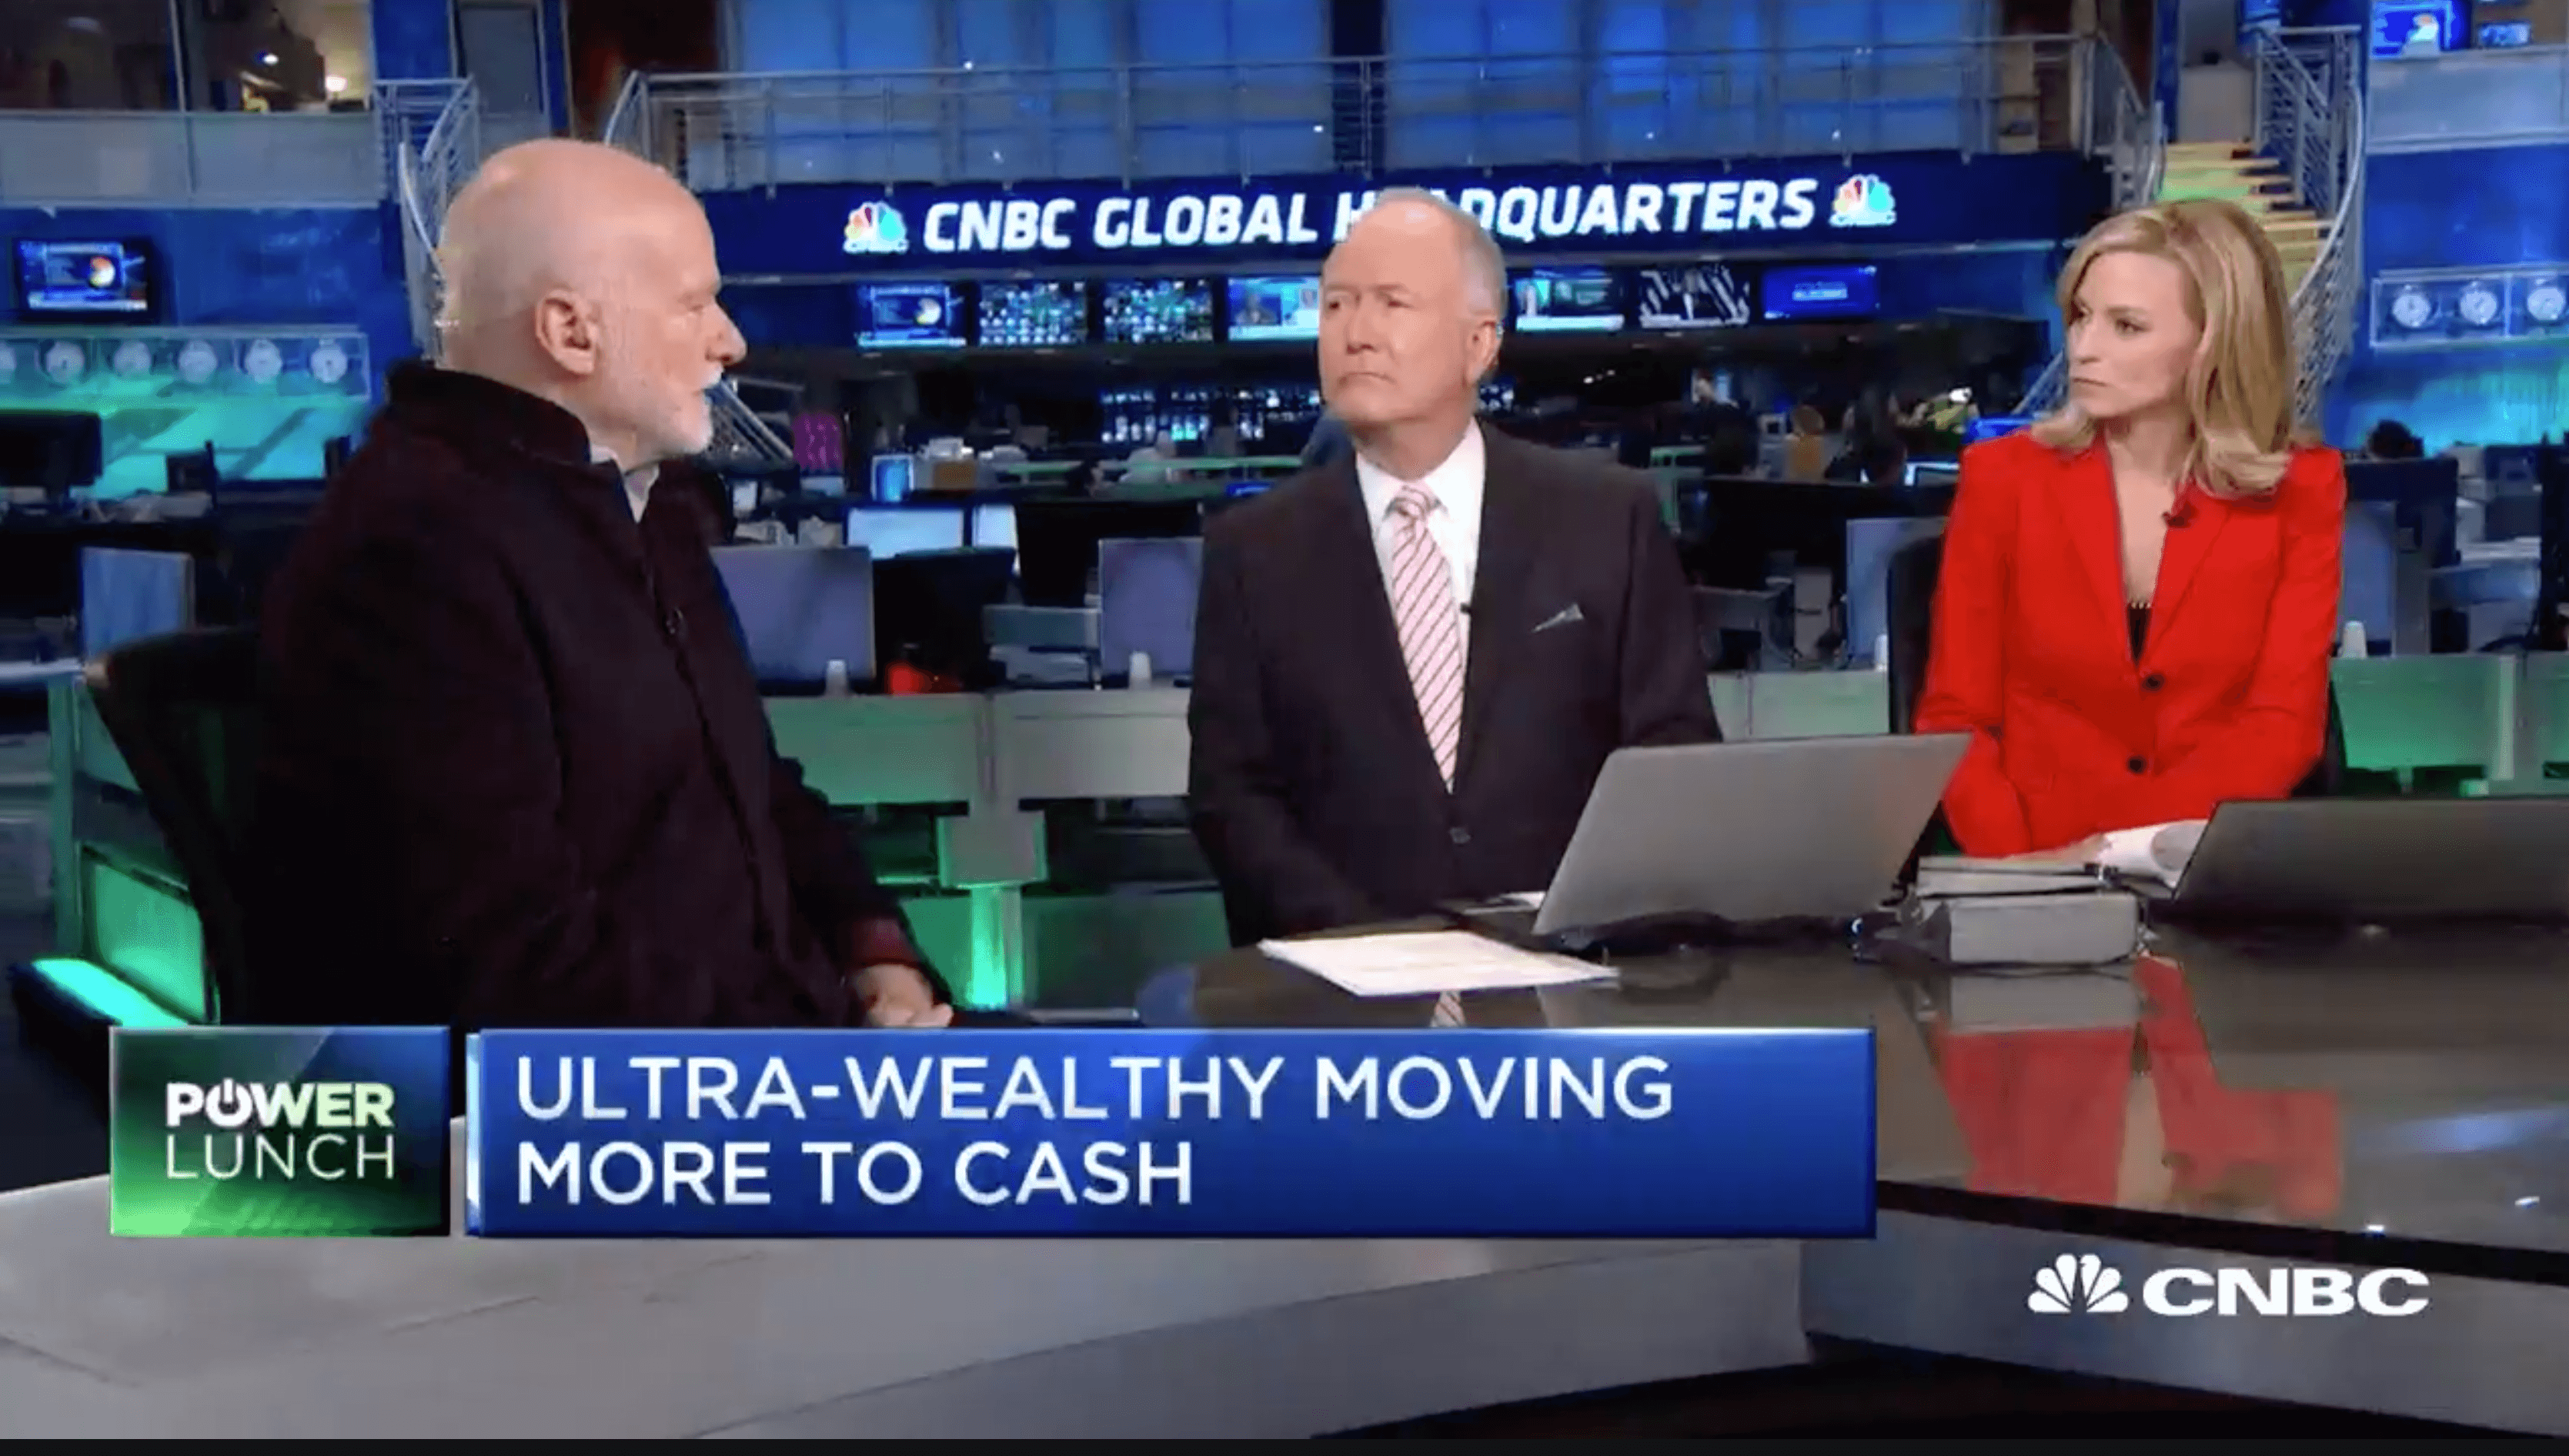 TIGER 21 FOUNDER DISCUSSES ON CNBC THE ASSET ALLOCATION OF THE ULTRA-WEALTHY